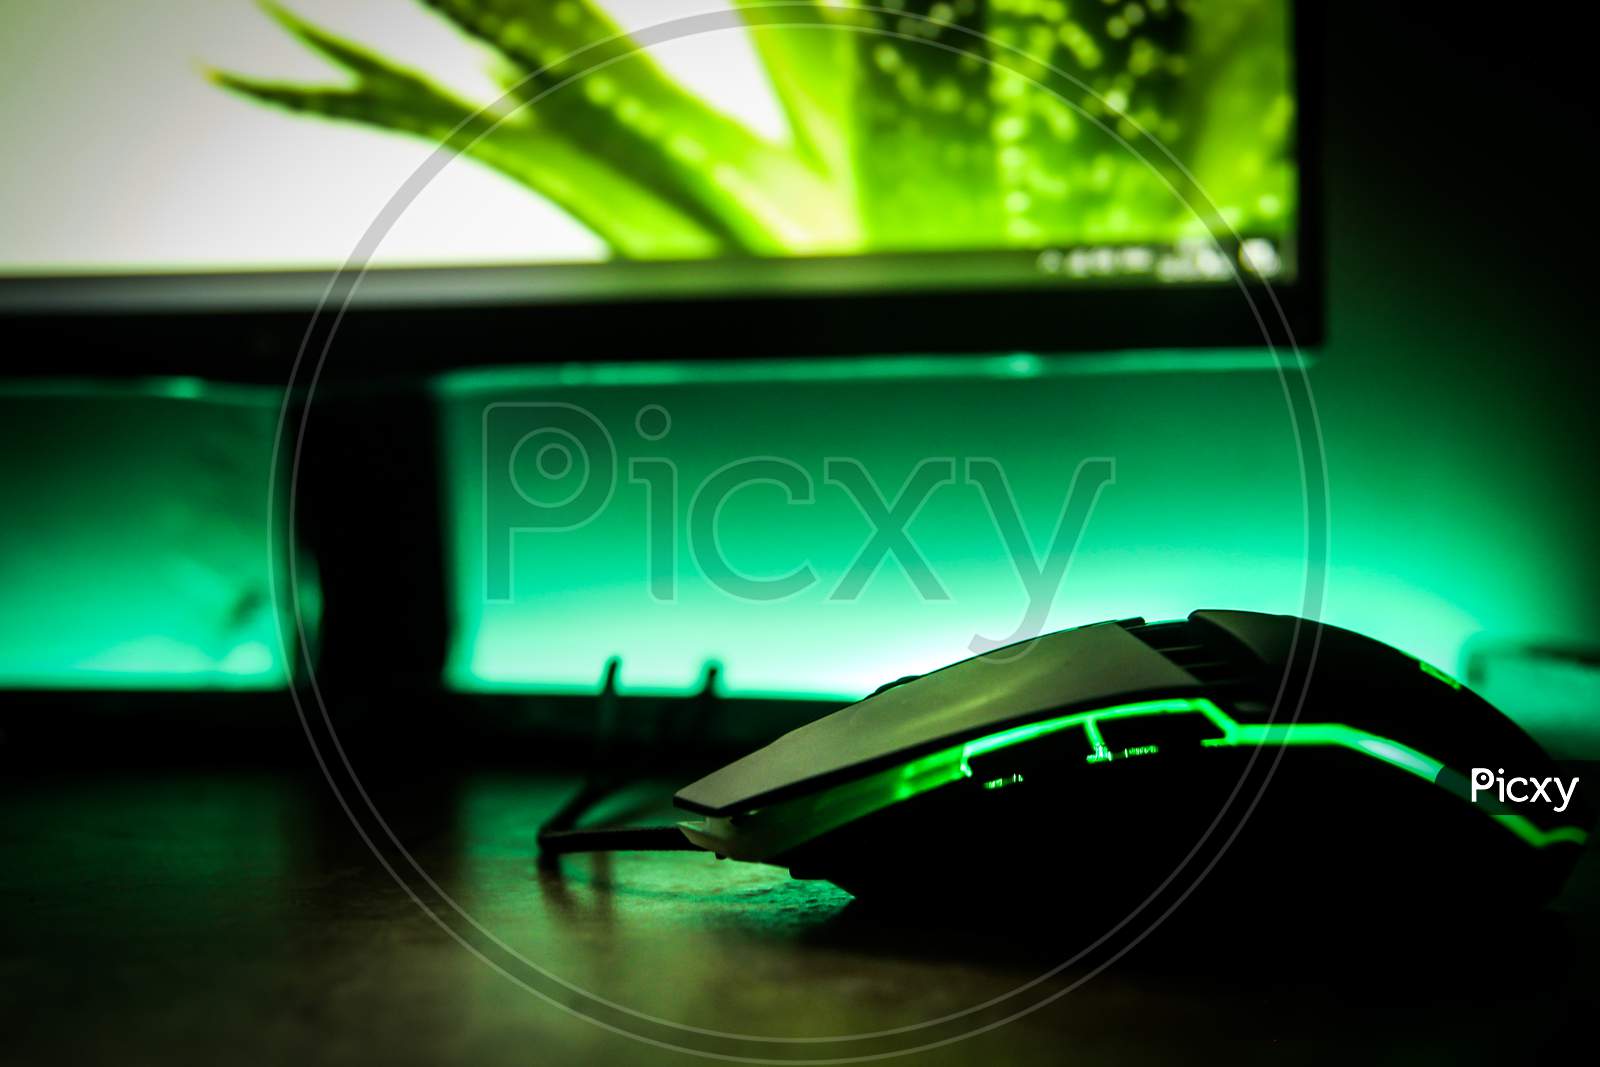 Gaming mouse for desktop, Gaming desktop setup with RGB colors, selective focus on object with blurred background